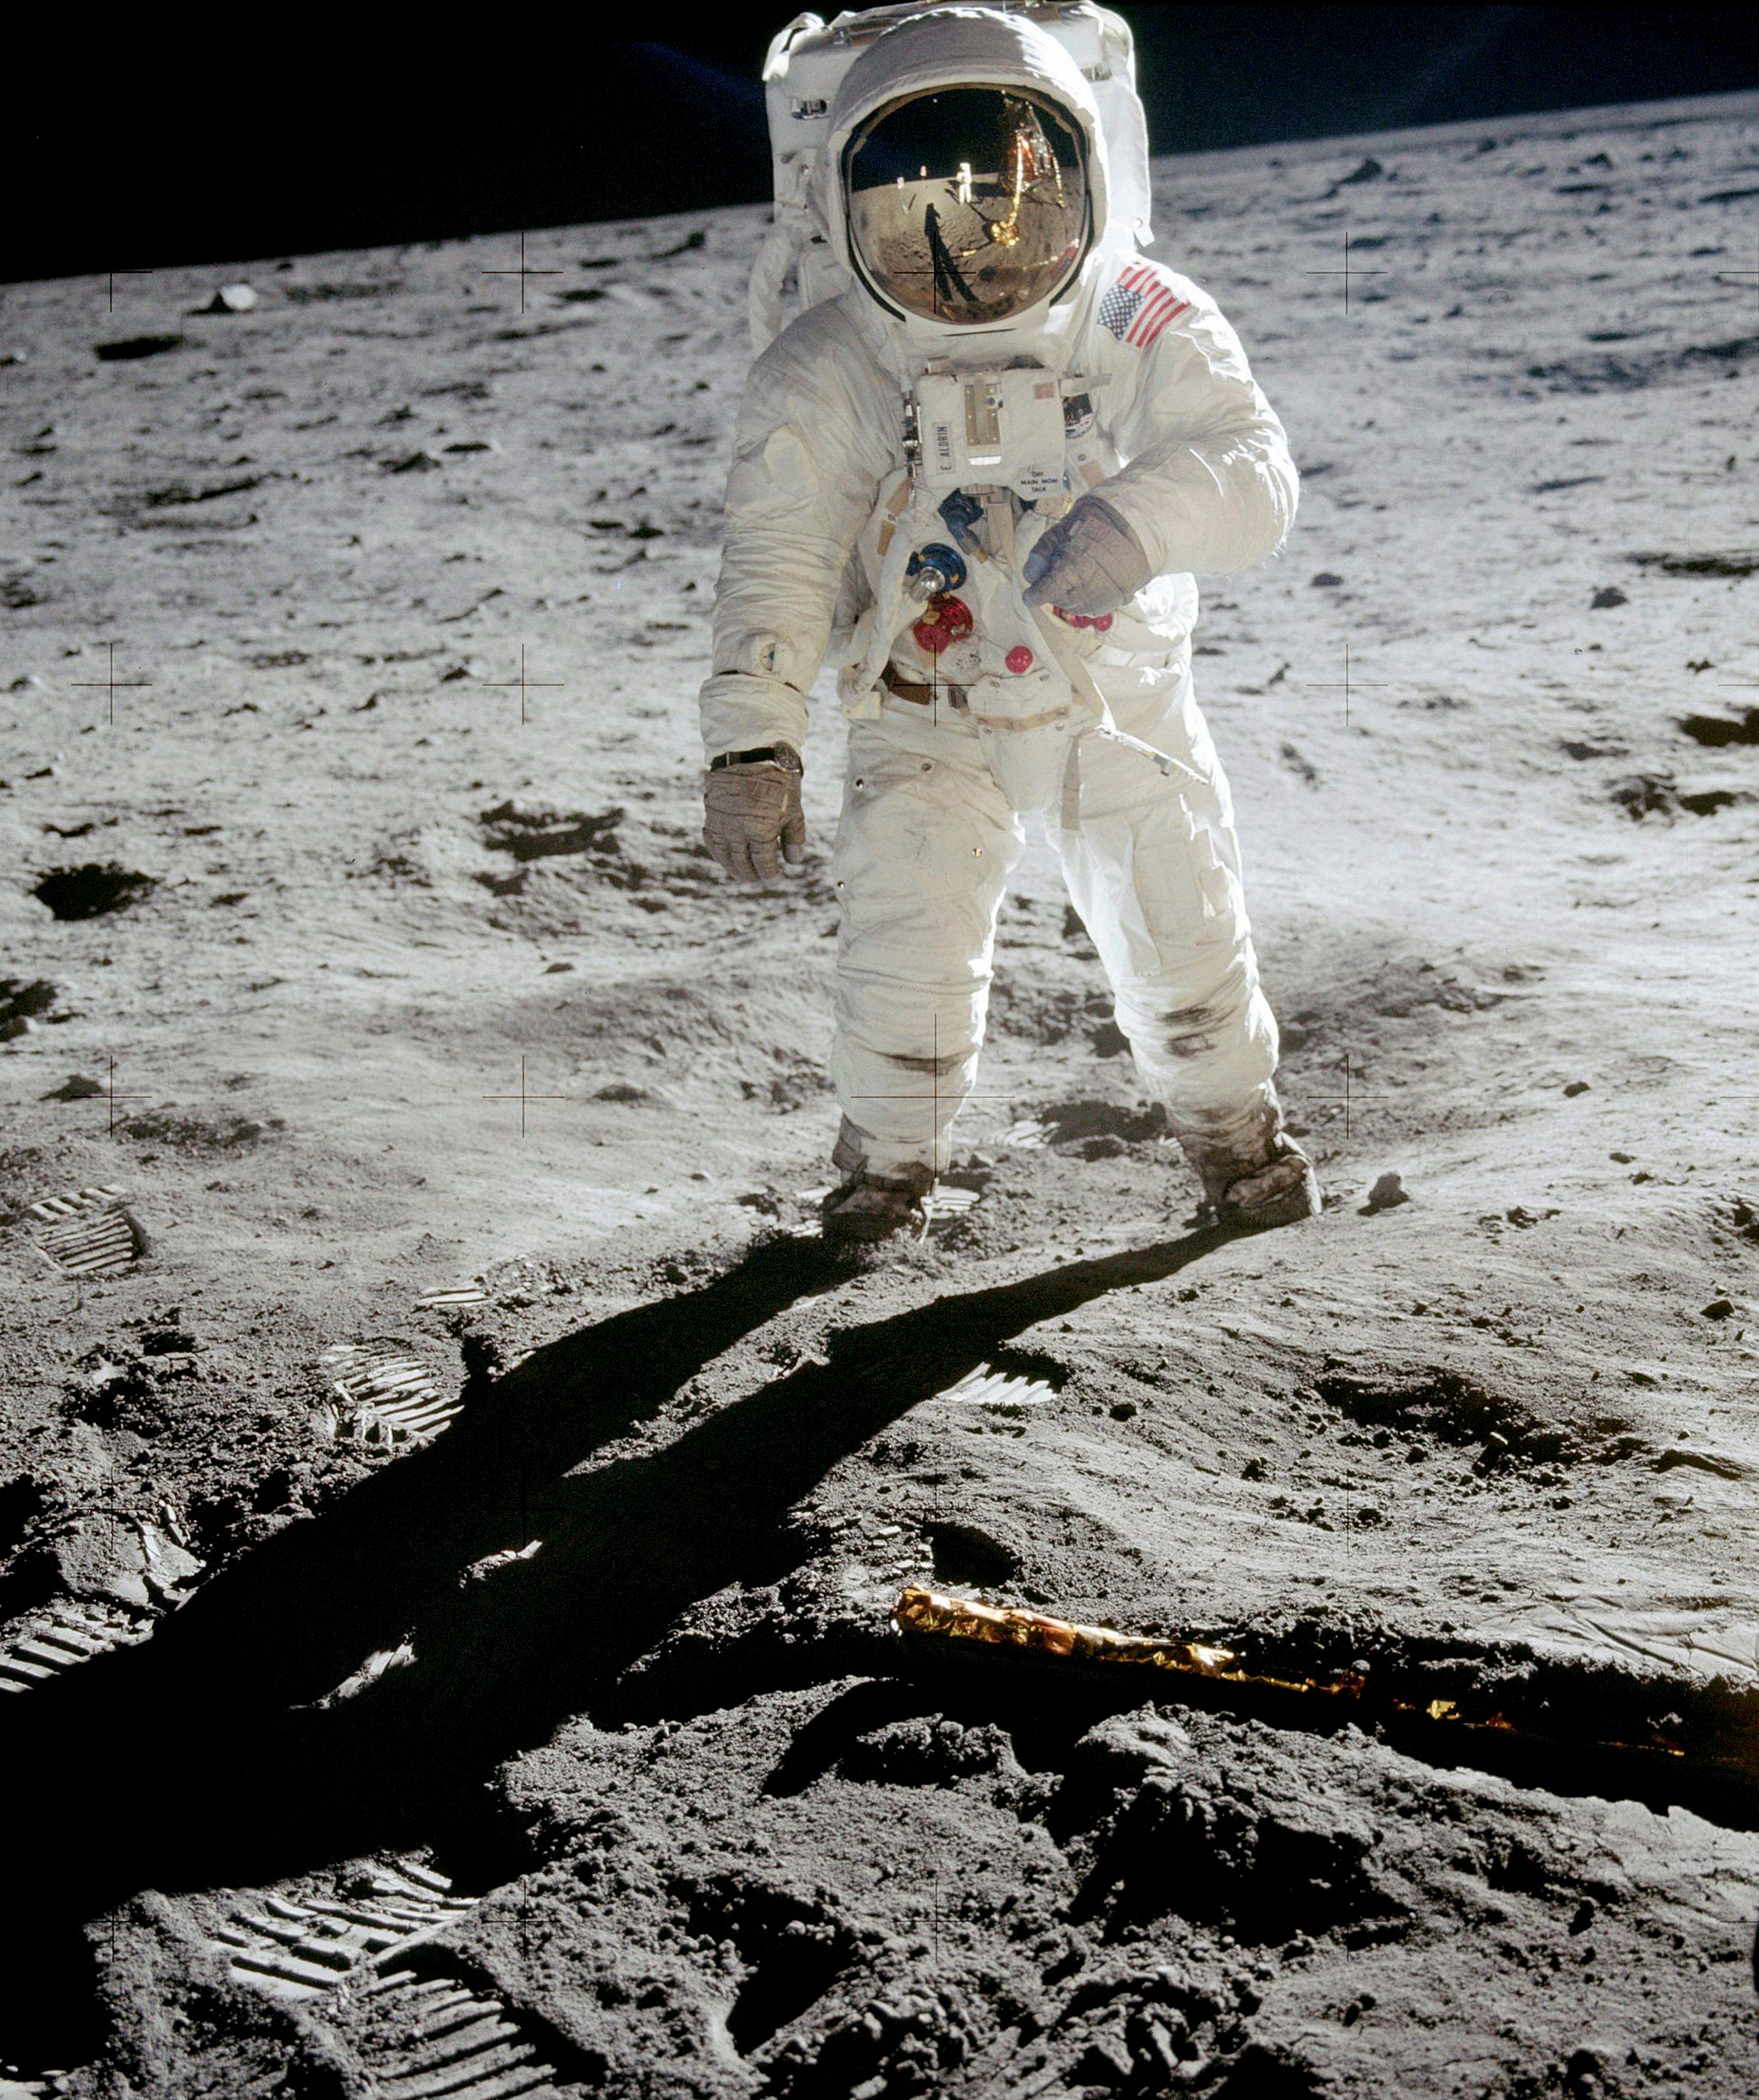 In this 1969 photo released by NASA, astronaut Buzz Aldrin walks on the surface of the moon near the leg of the lunar module Eagle during the Apollo 11 mission. Astronaut Neil Armstrong, who took the photograph, is reflected in Aldrin's visor. From Thursday, Oct. 12, 2017 through Nov. 2., Skinner Auctioneers and Appraisers is selling more than 400 vintage prints of photos, including the photo of Aldrin, made by American astronauts from 1961 to 1972. (AP/PTI)